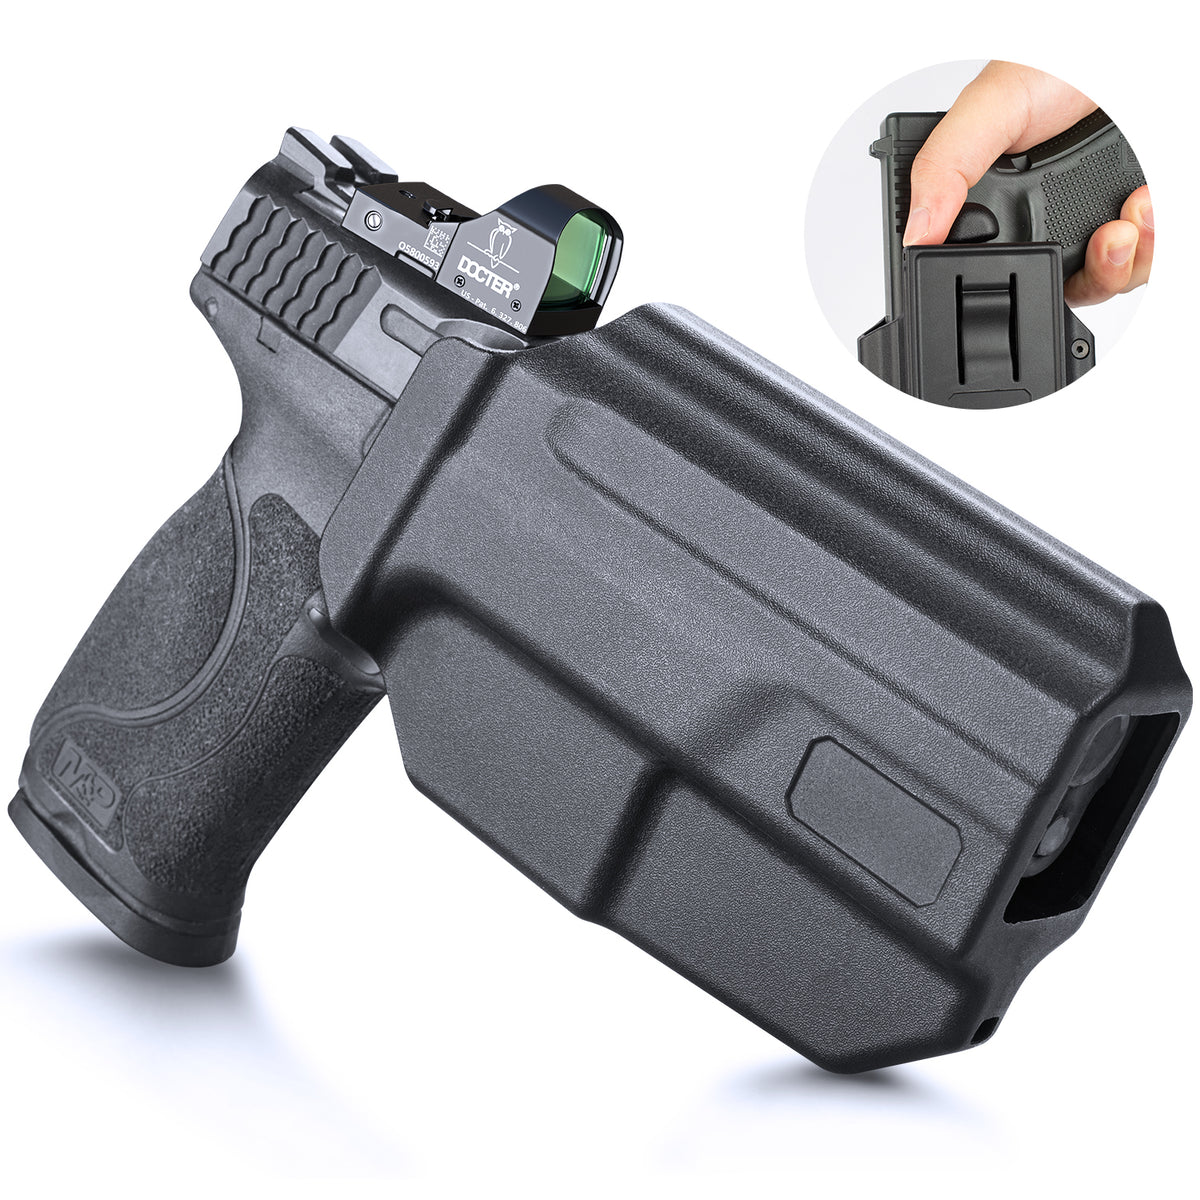 Level II Retention Thumb Release OWB Holster S&W M&P 9mm Polymer Holster Appendix Open Carry Trigger Guard with Red Dot Optics Cut | WARRIORLAND